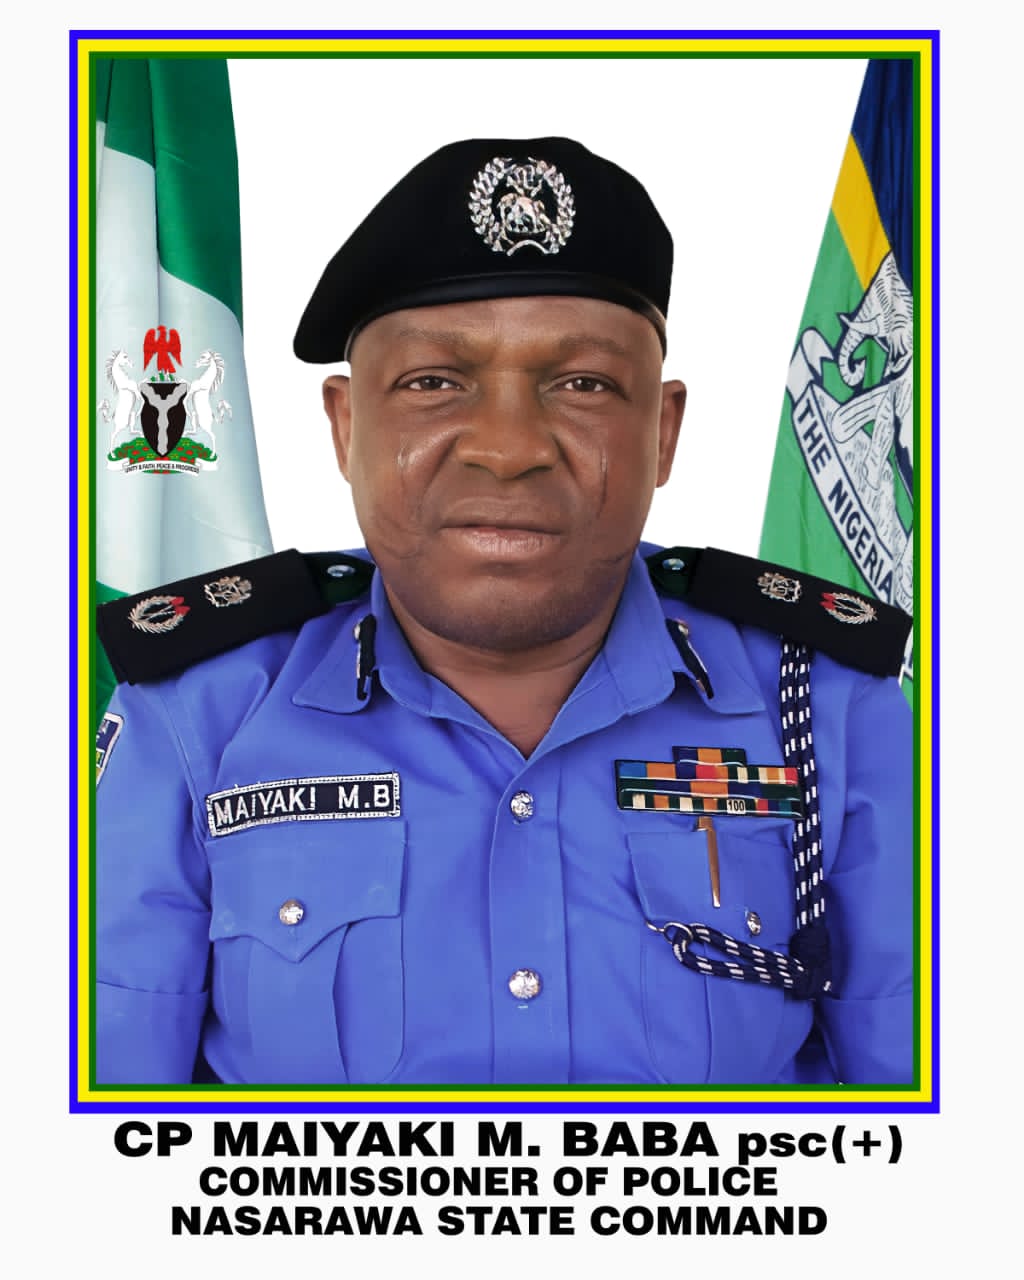 Kidnappers release Nasarawa traditional ruler, wife after 8 days— Report